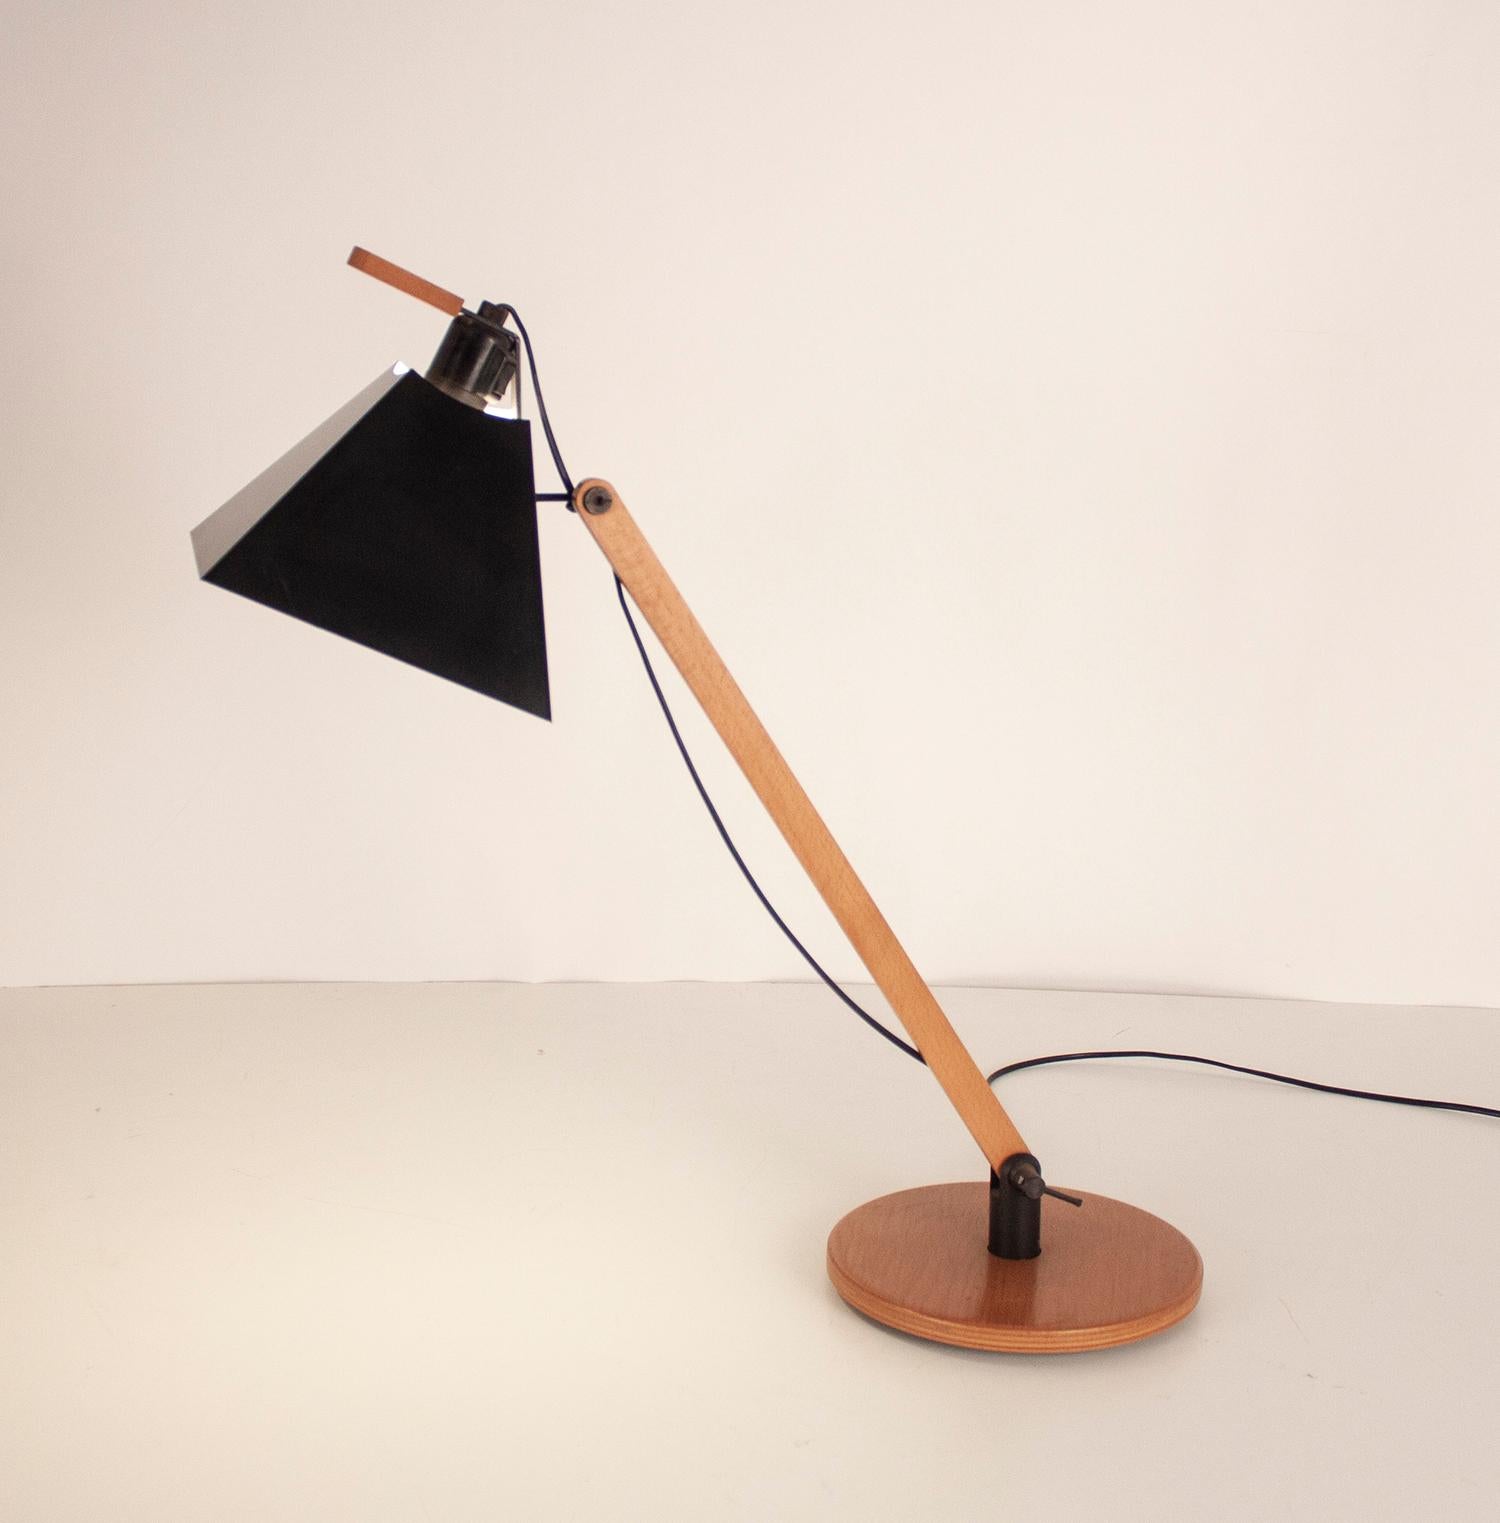  Vintage Arquímedes Desk Table Lamp by Gemma Bernal for Tramo, 1970's In Good Condition For Sale In Barcelona, Cataluna